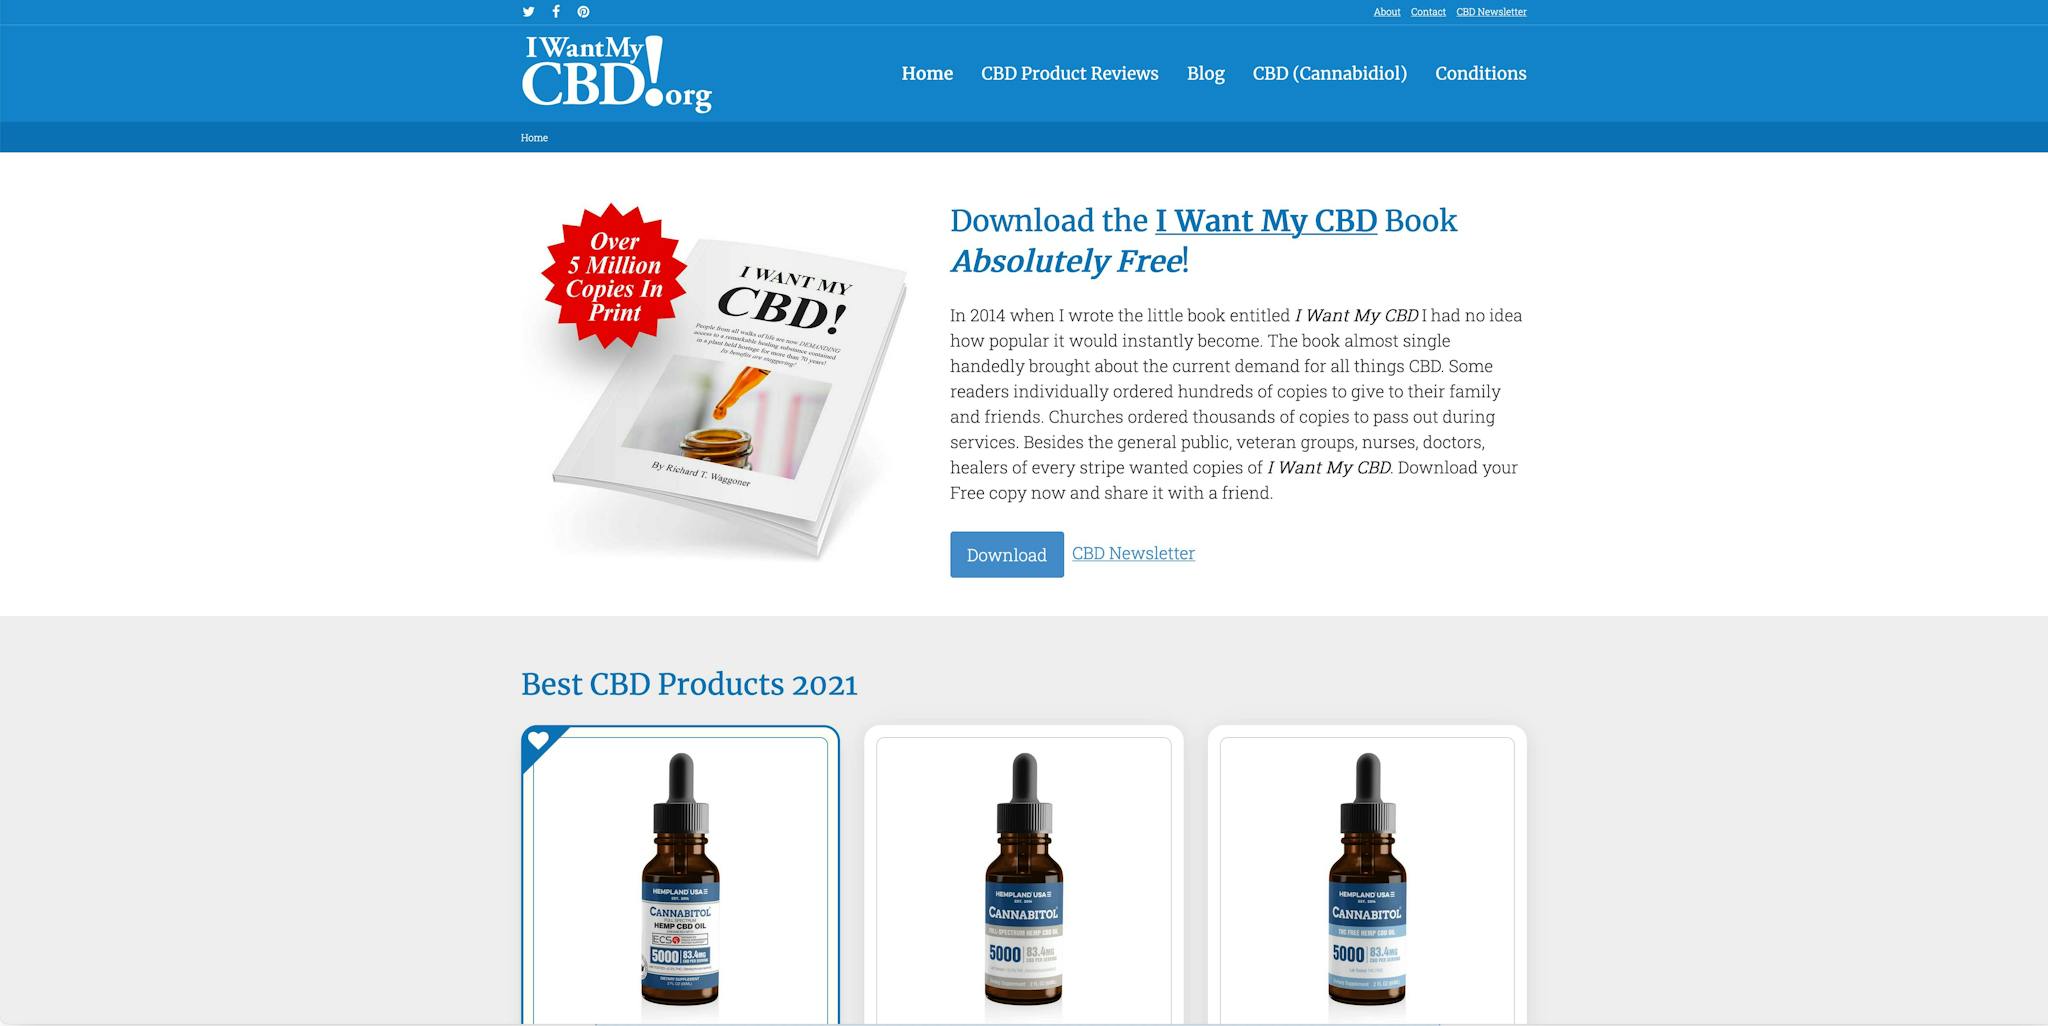 I want my CBD Home Page